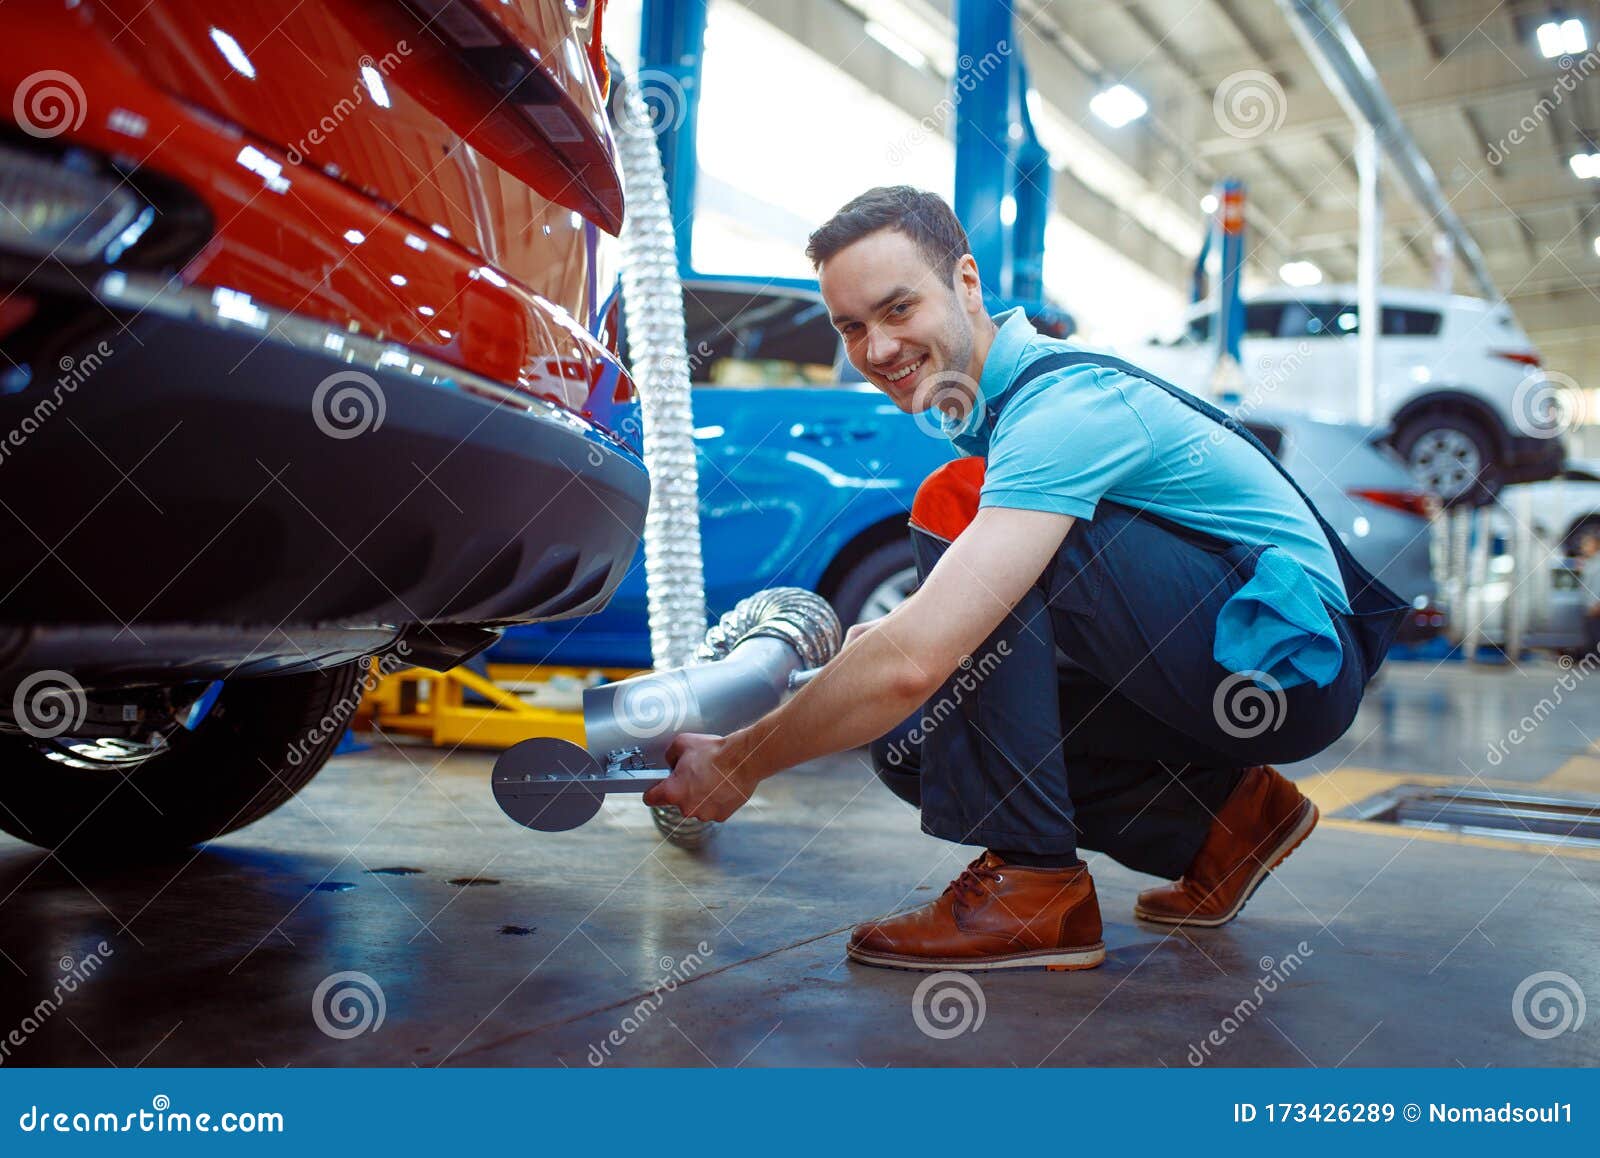 Worker Connects the Exhaust Gas Ventilation System Stock Image - Image